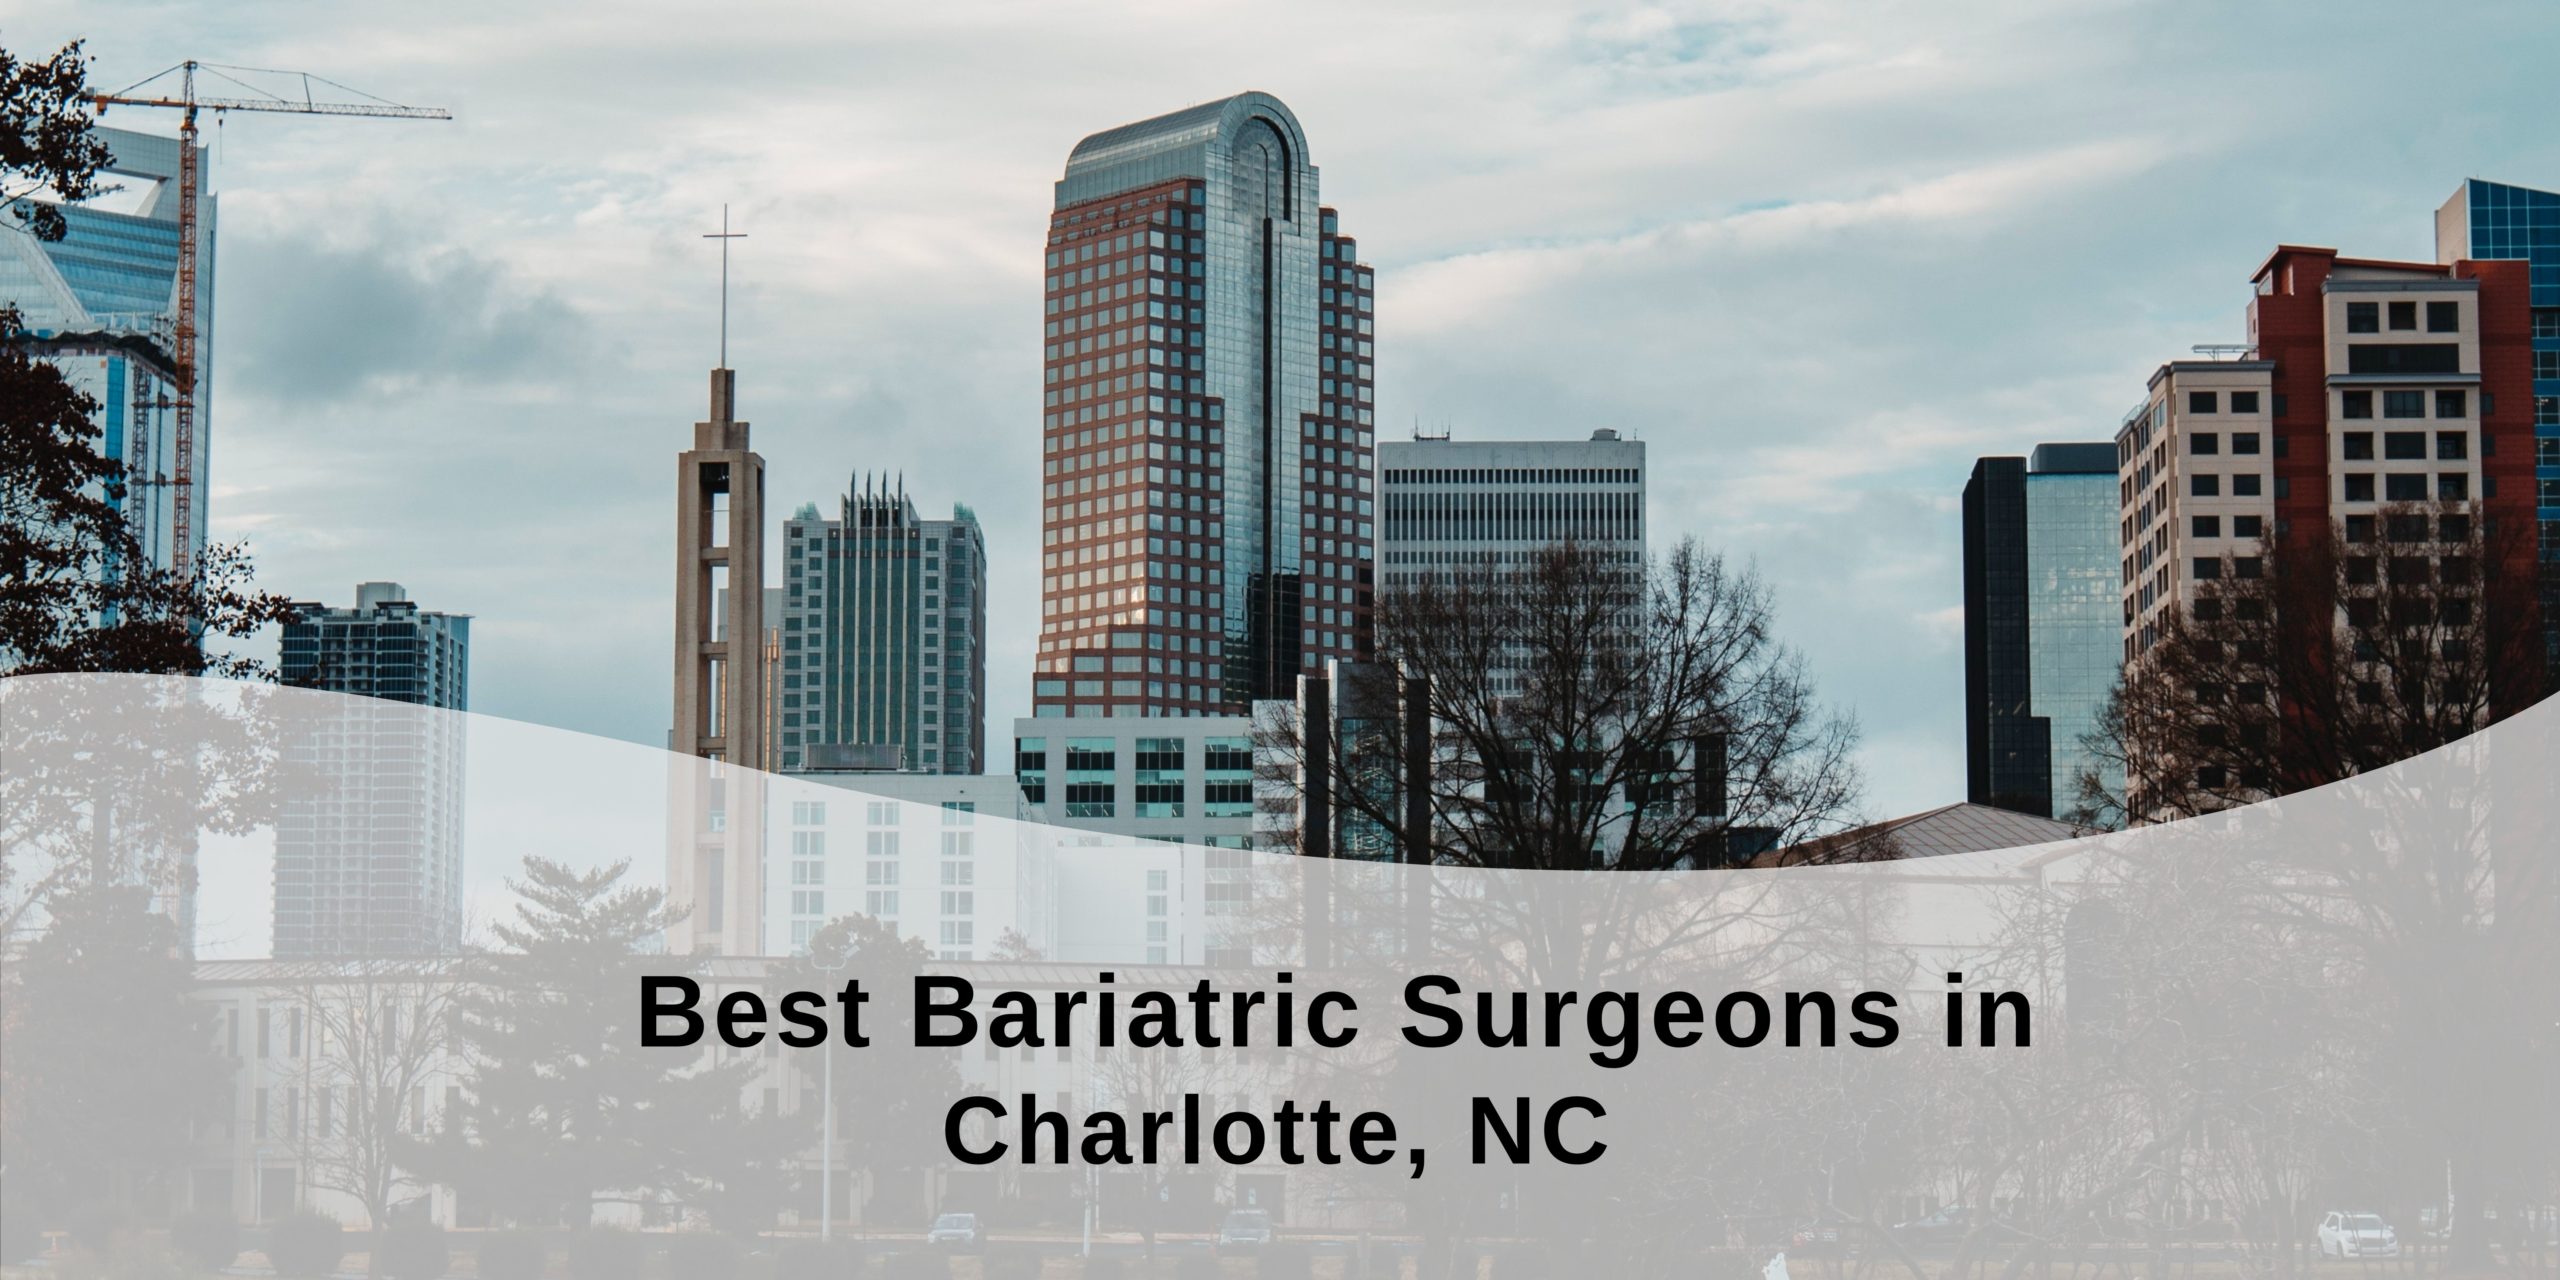 Best Bariatric Surgeons in Charlotte, NC